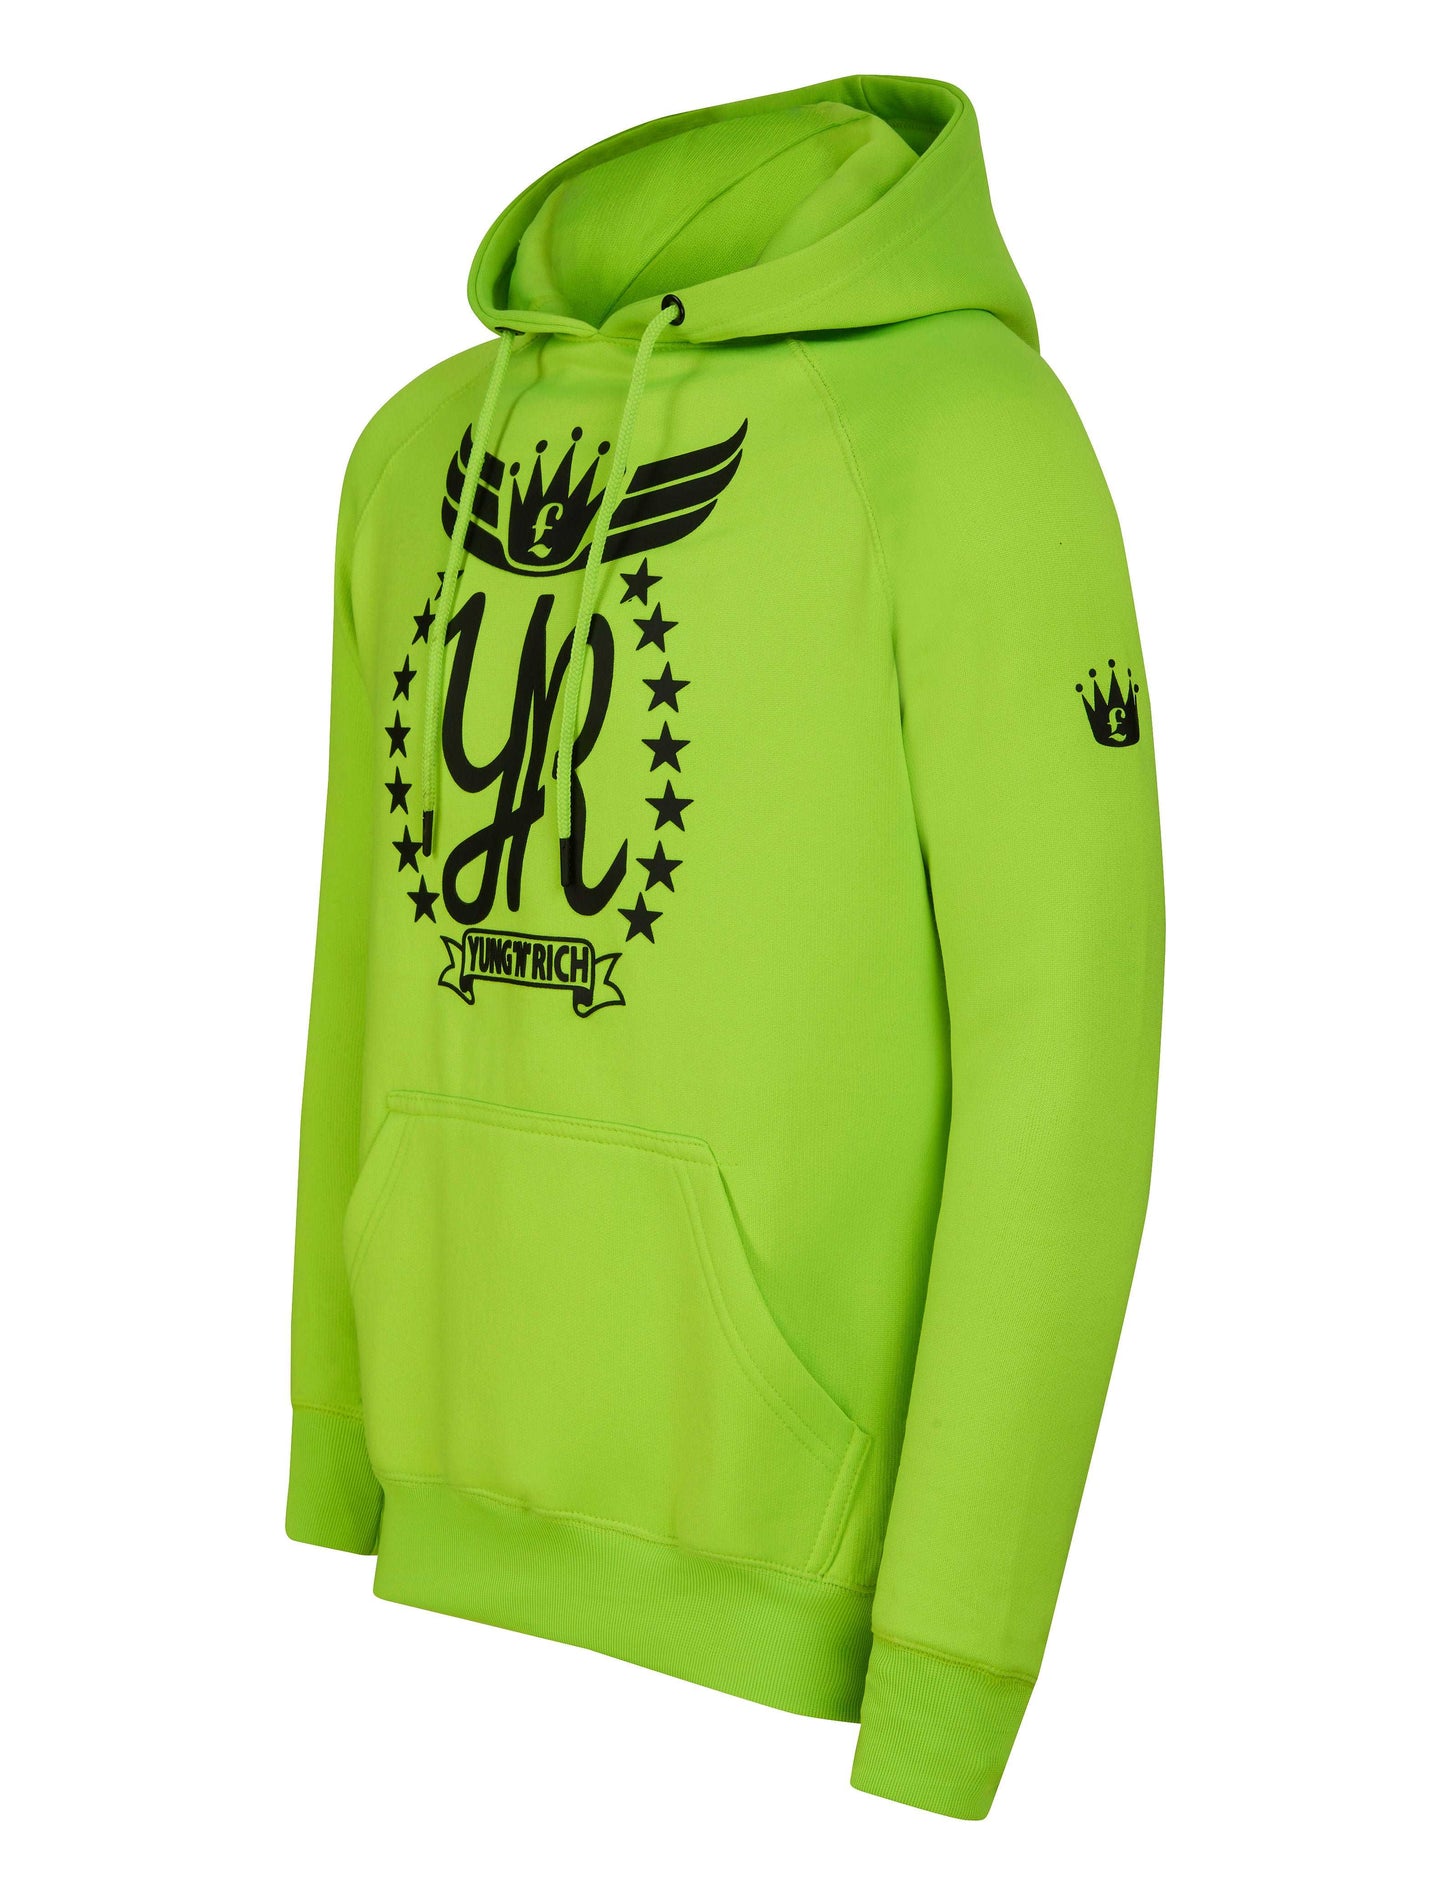 YUNG'N'RICH HOODIE - colour Neon Green with black rubber Yungnrich logo side view